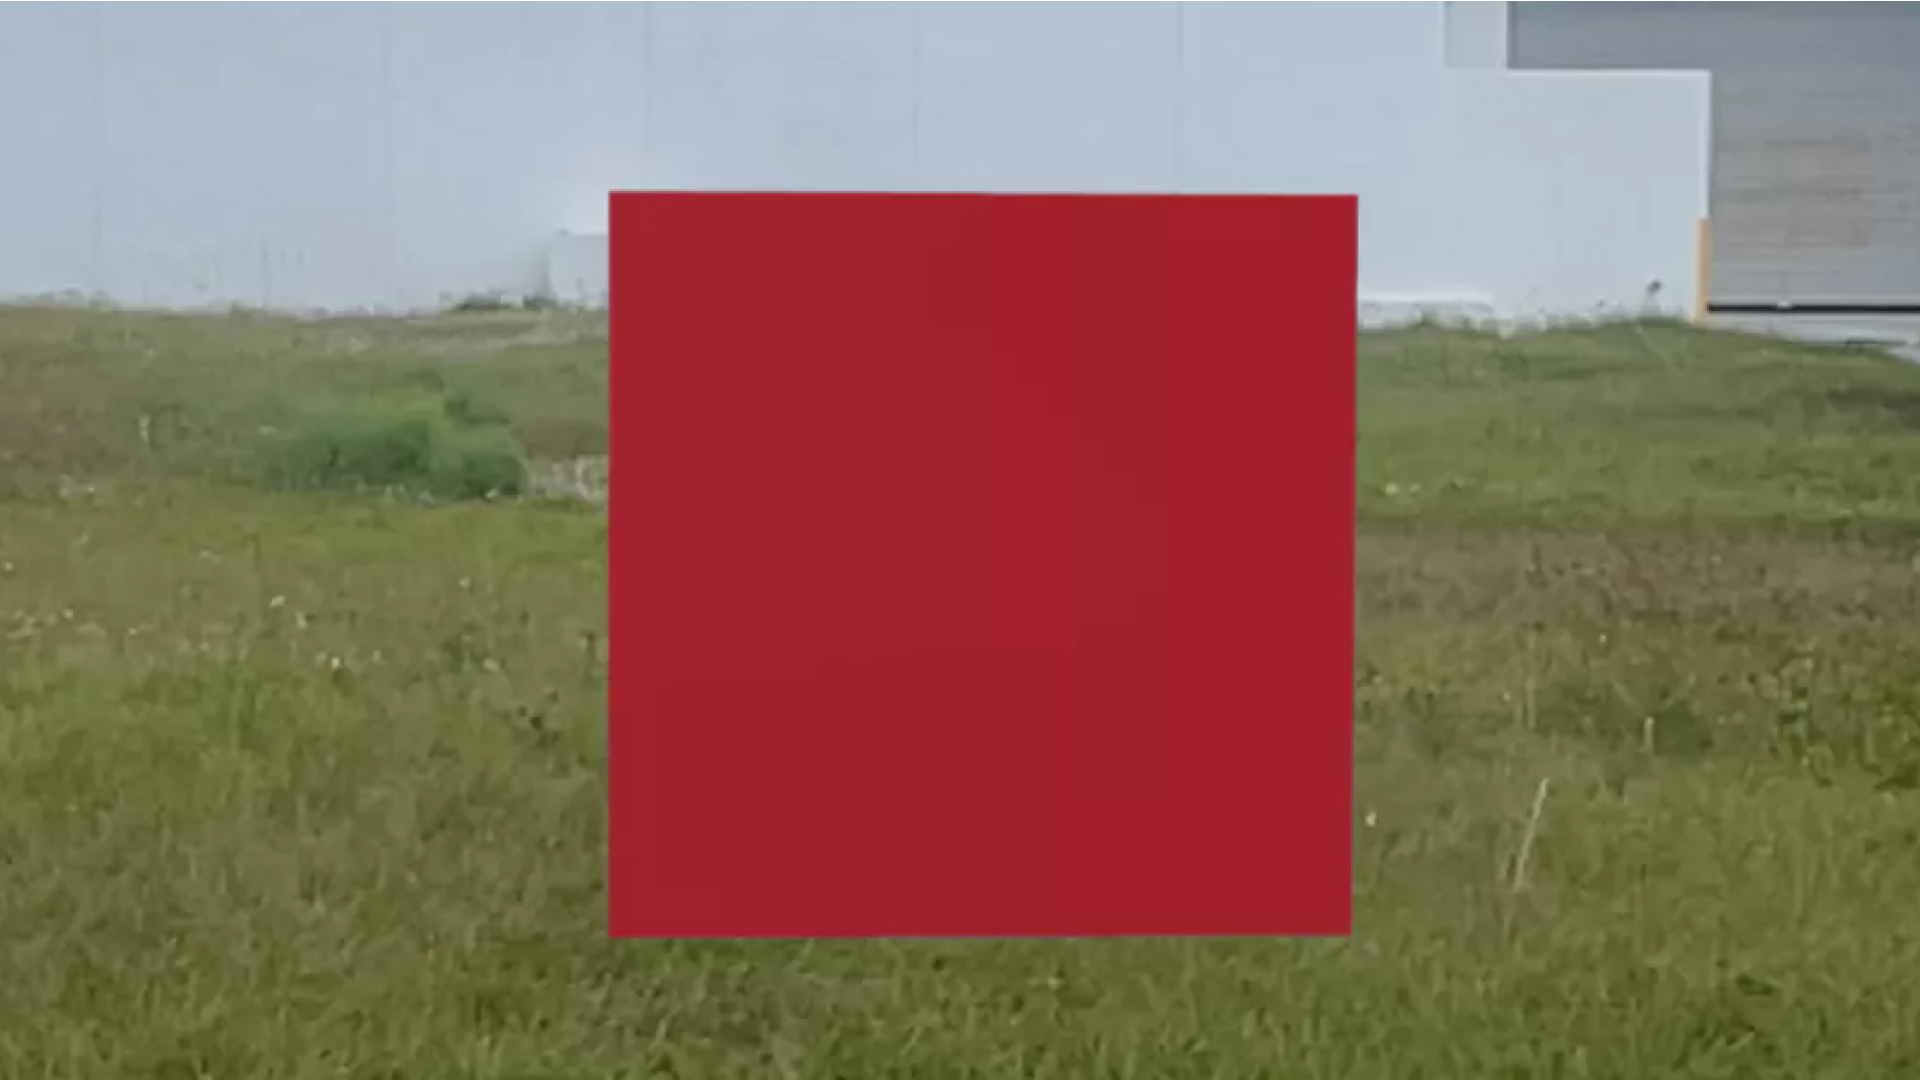 A red pixel positioned in an open space with MUD's AR tool